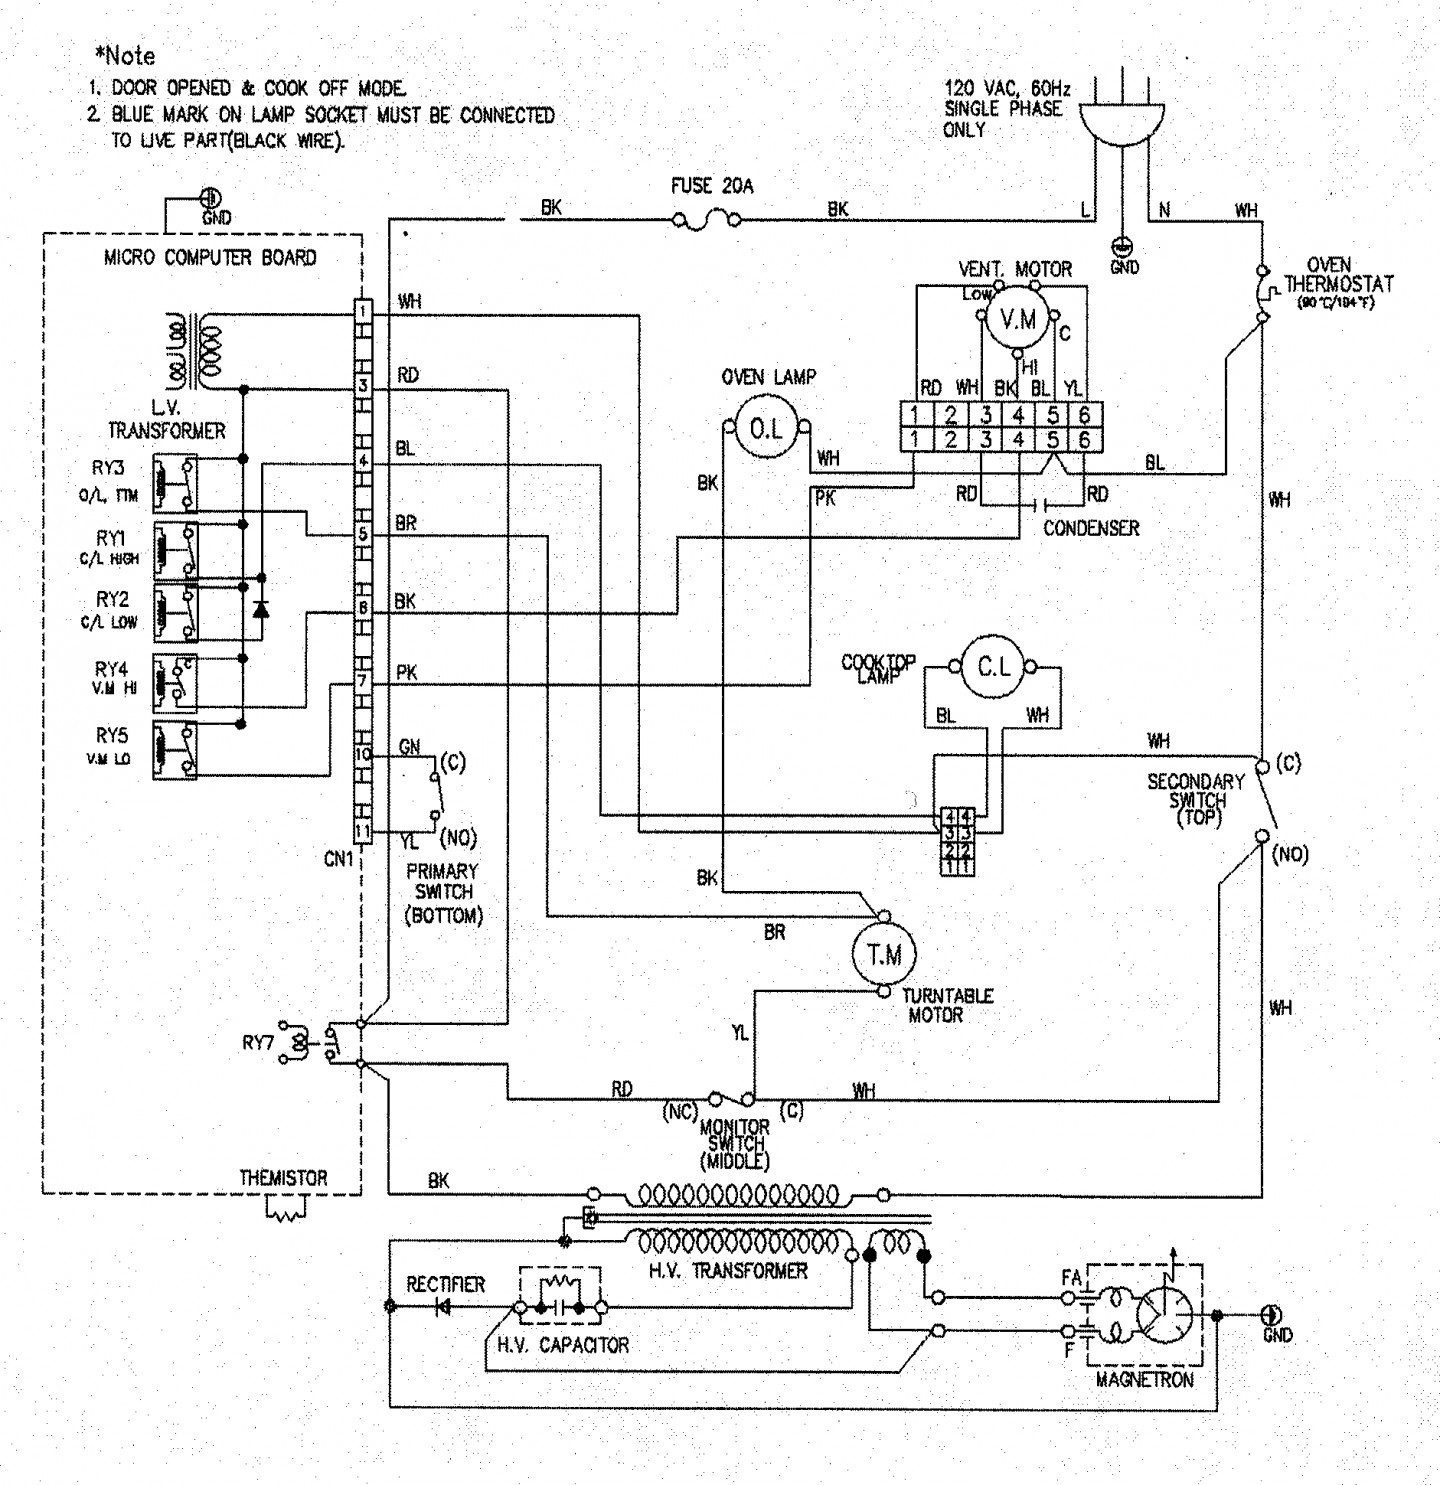 Wiring Diagram for Electric Cooker New Wiring Diagram Electric Hob Save Electric Stove Wiring Diagram